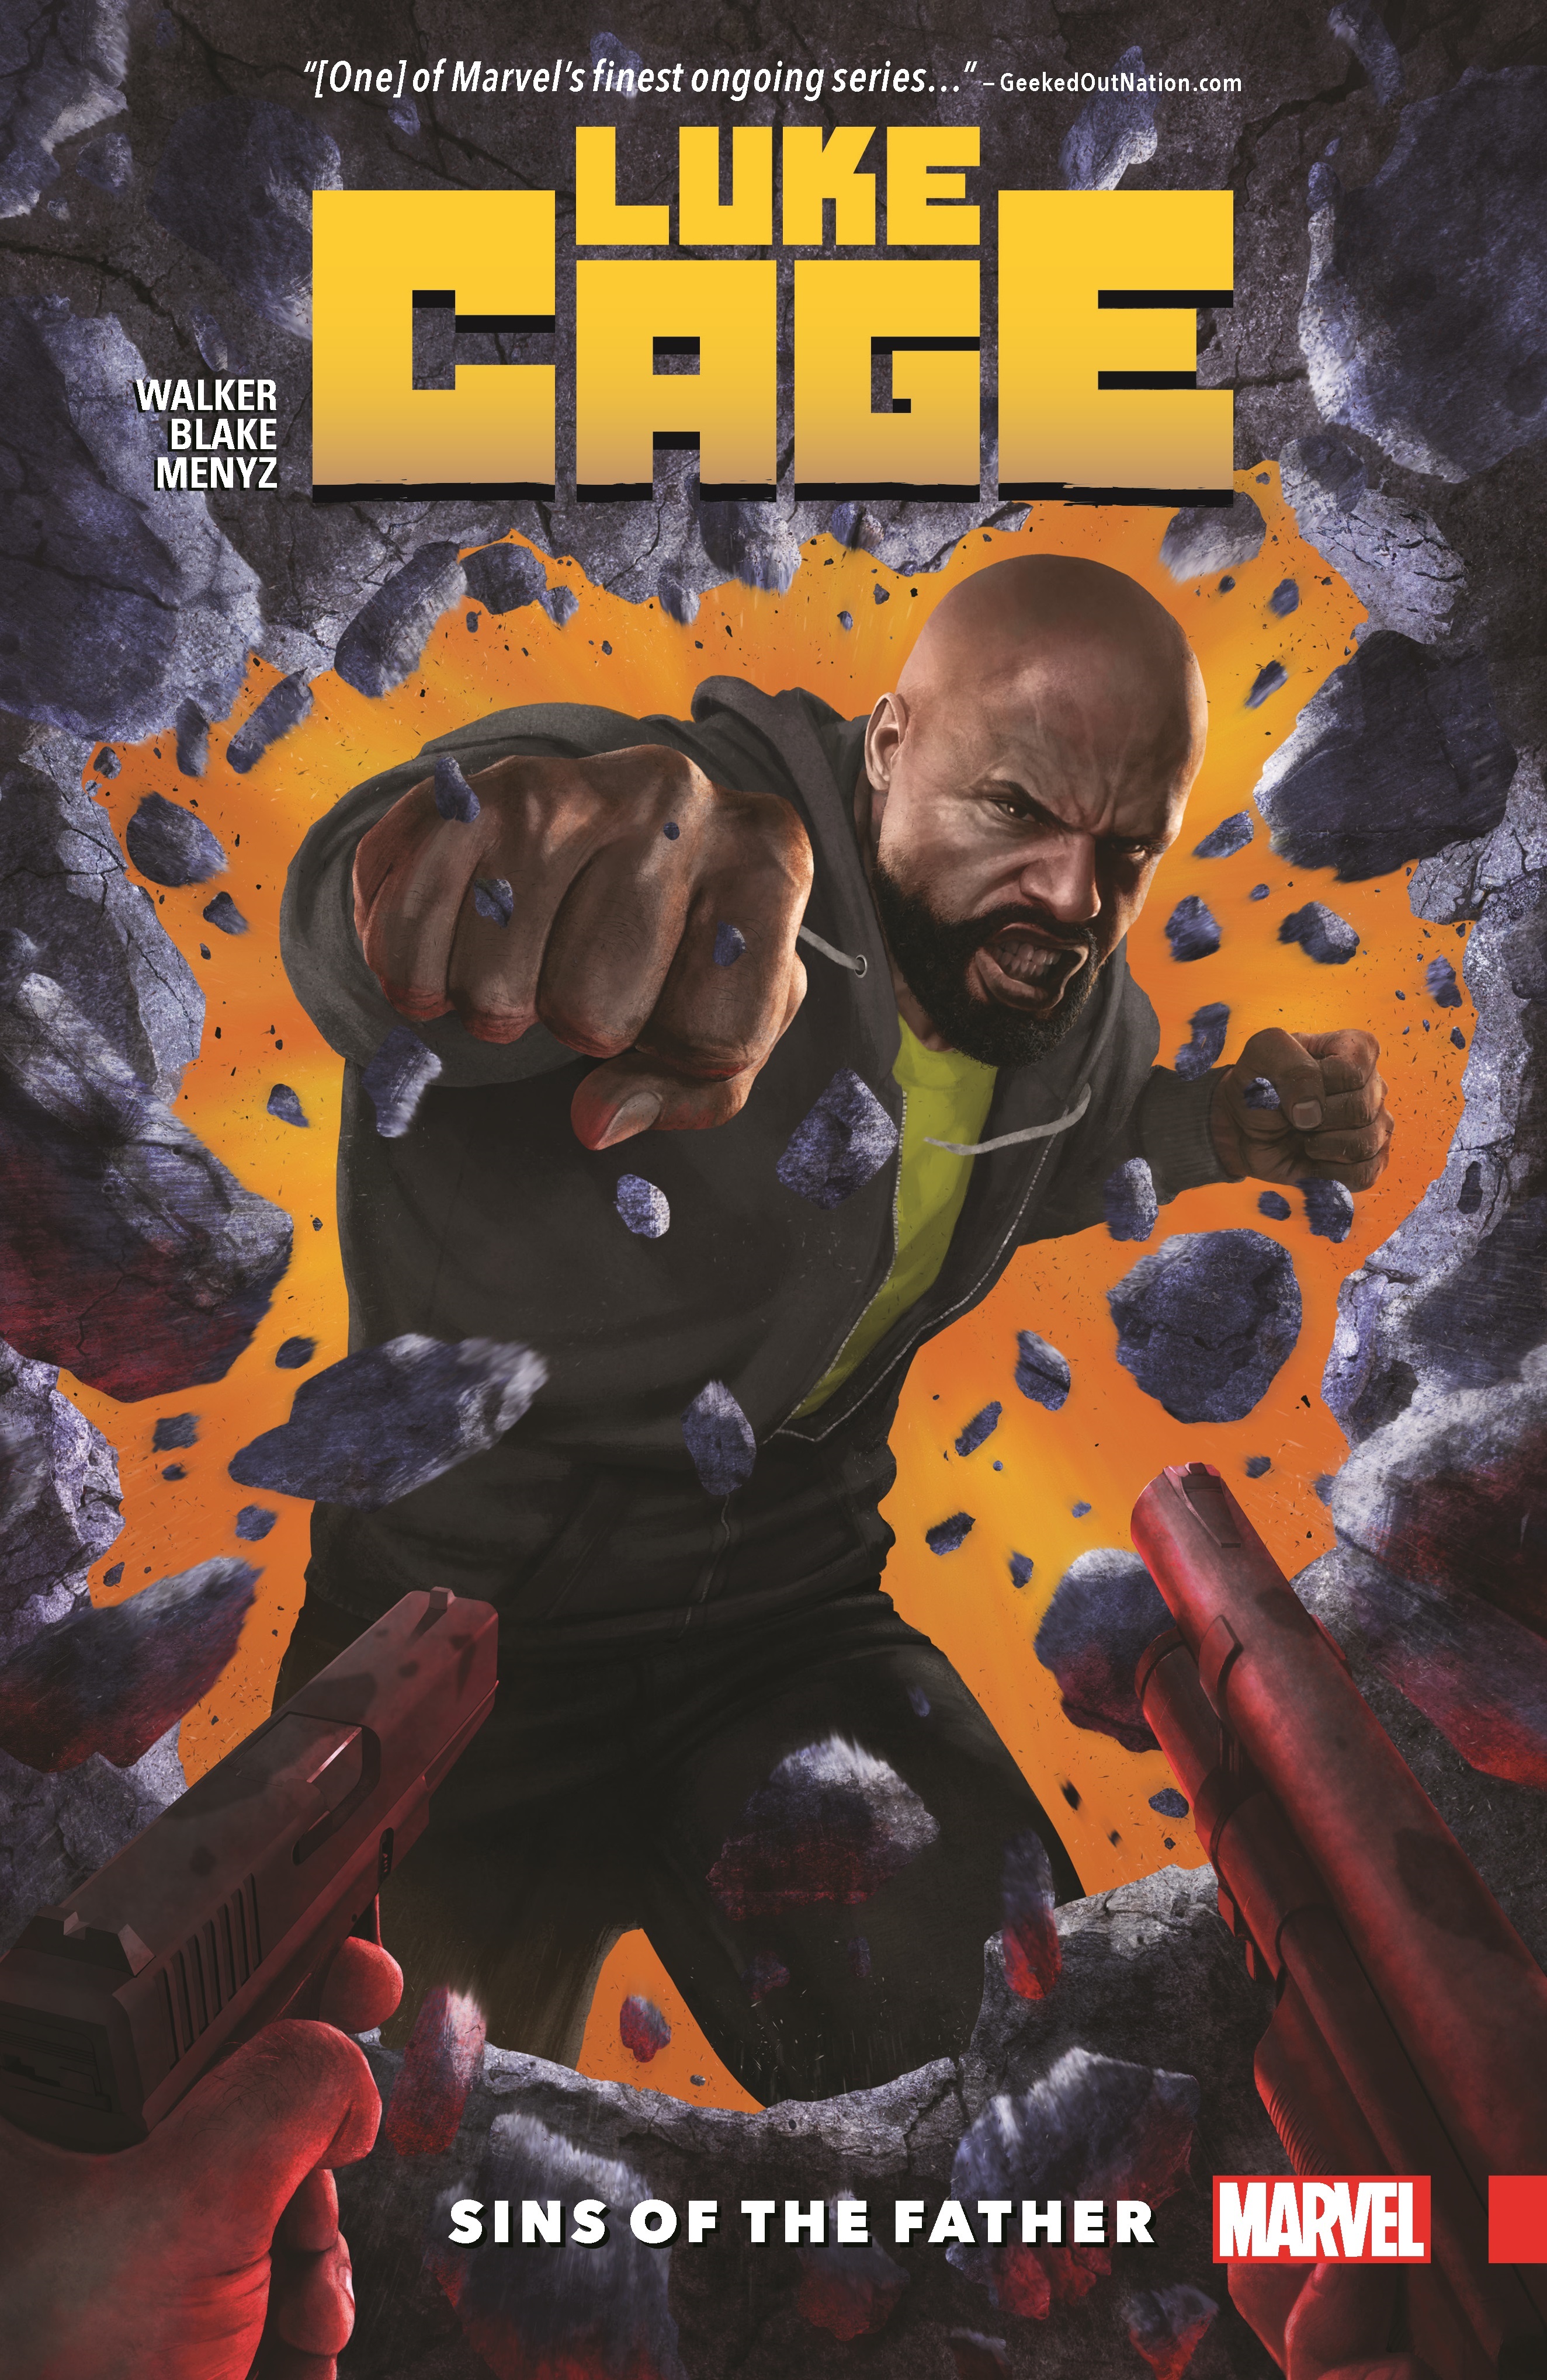 Luke Cage Vol. 1: Sins of the Father (Trade Paperback)